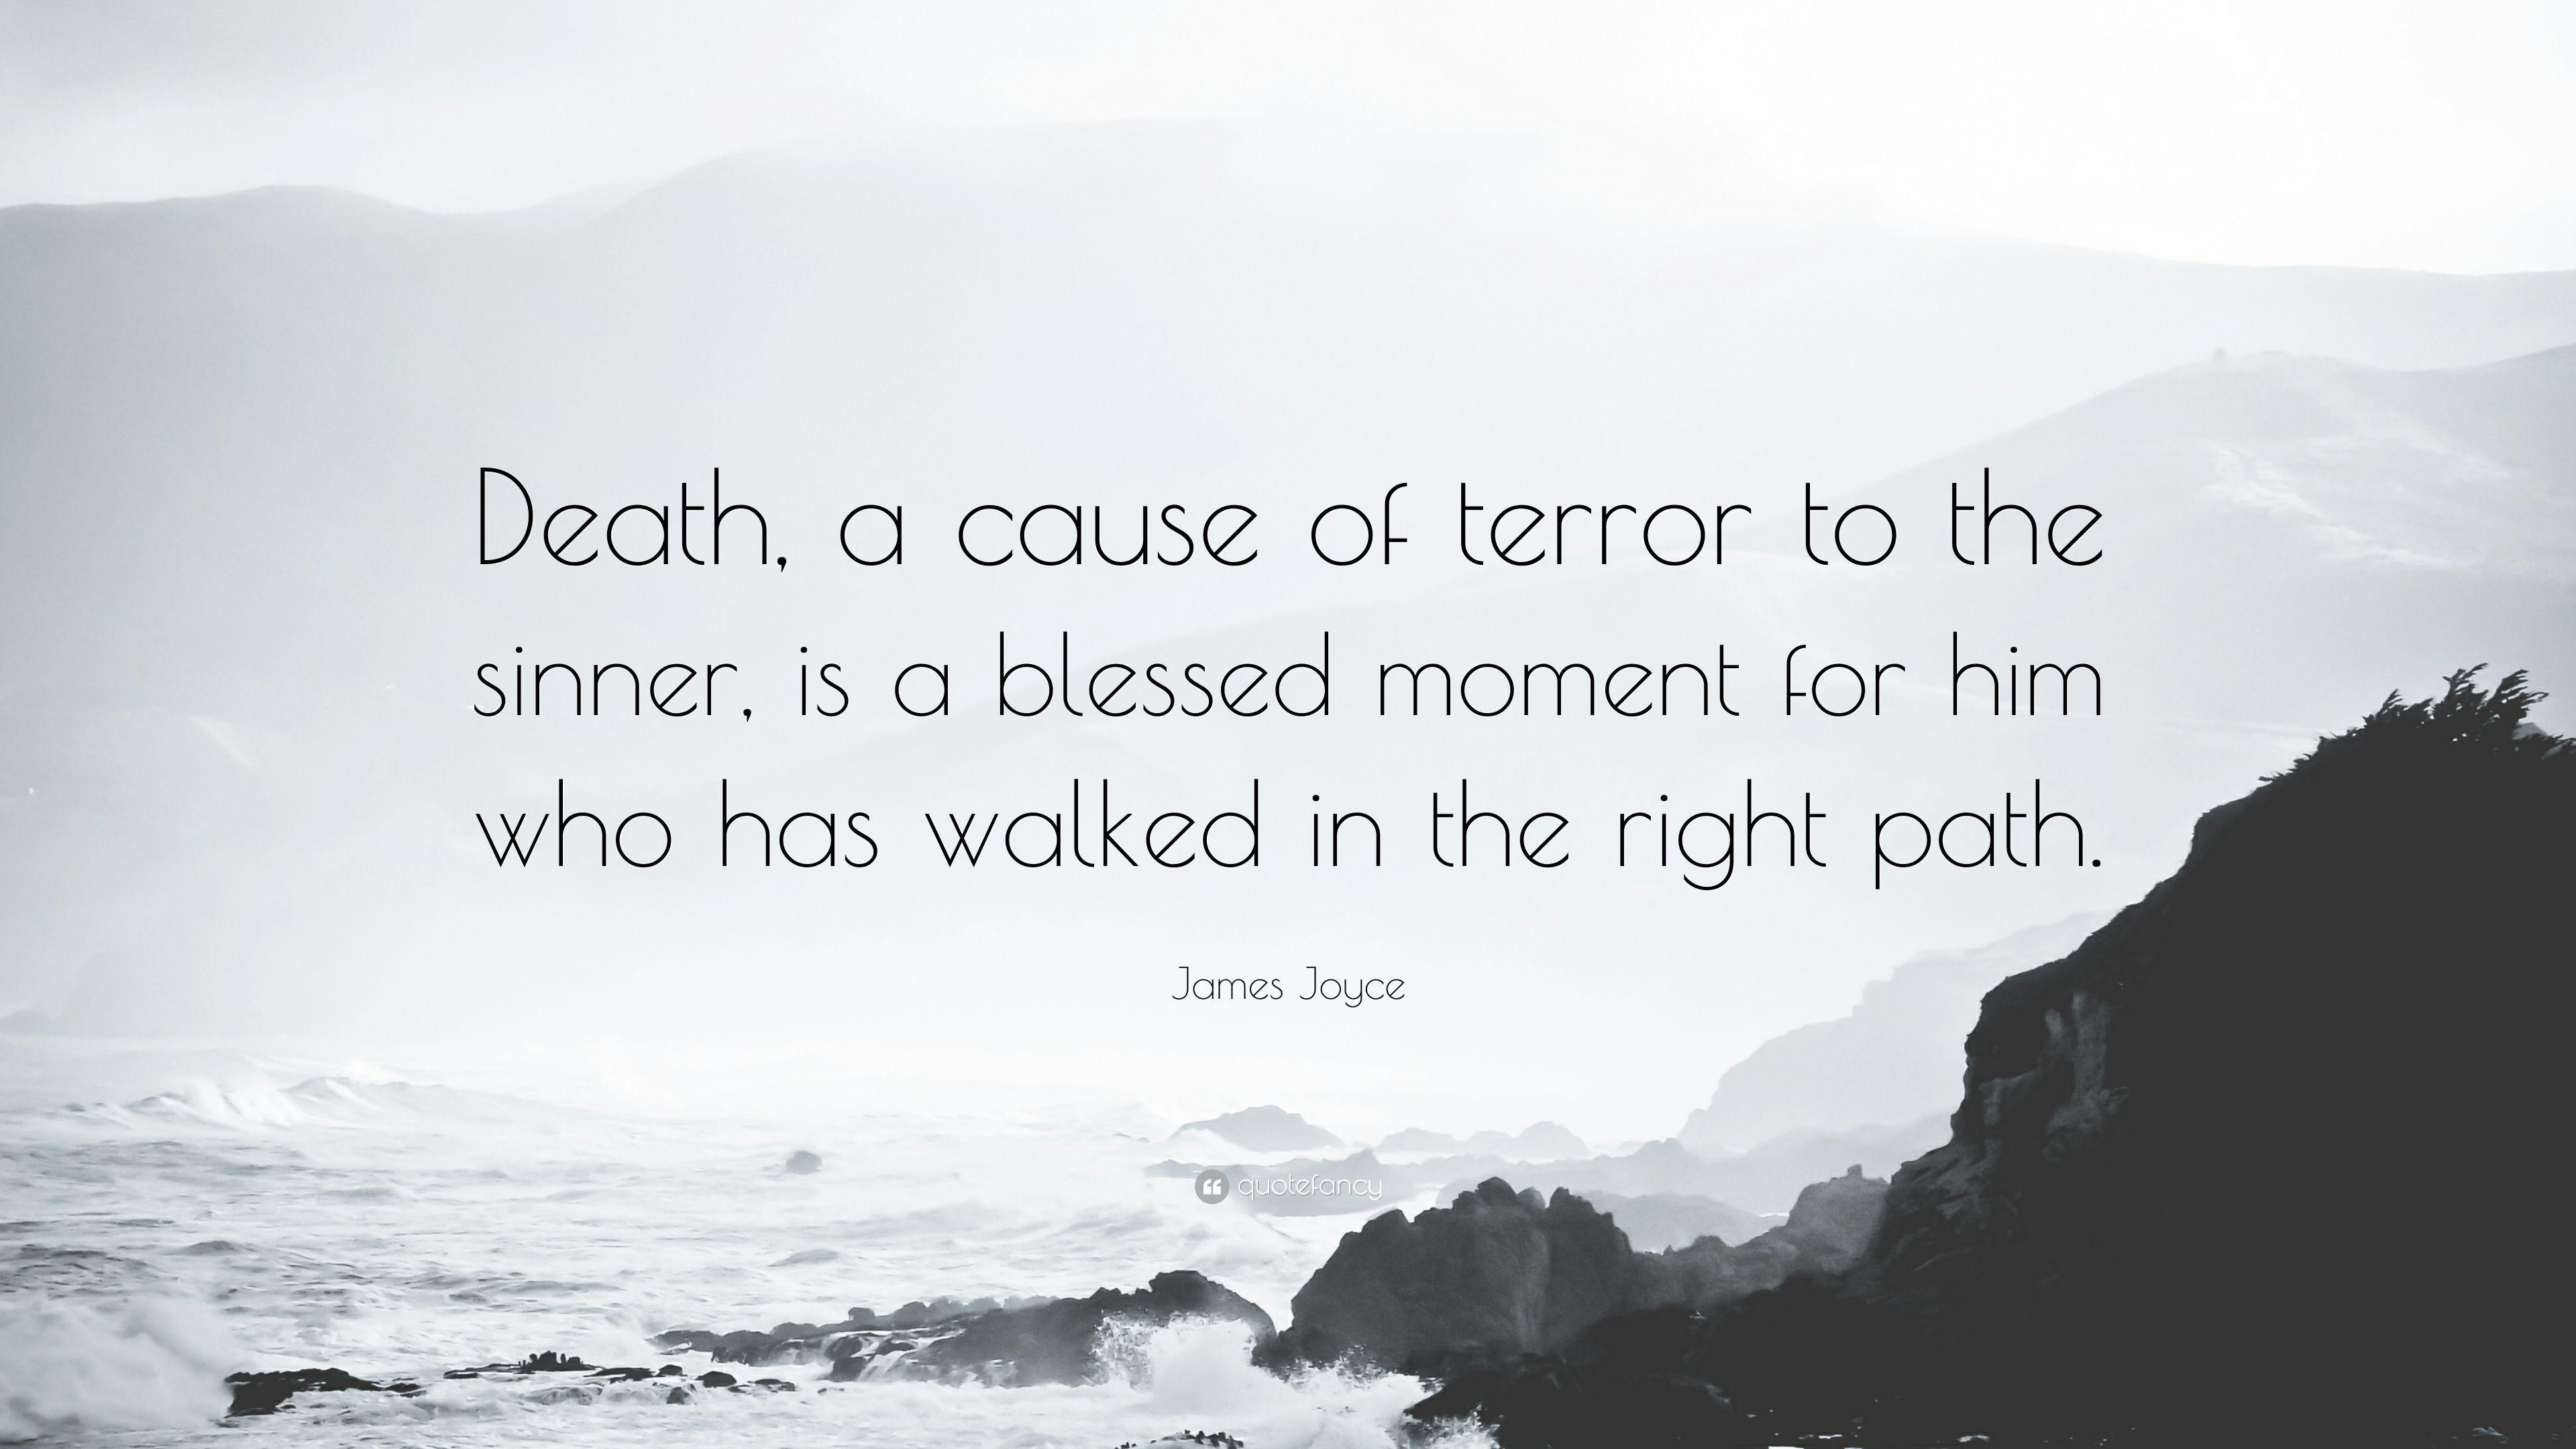 James Joyce Quote: “Death, a cause of terror to the sinner, is a